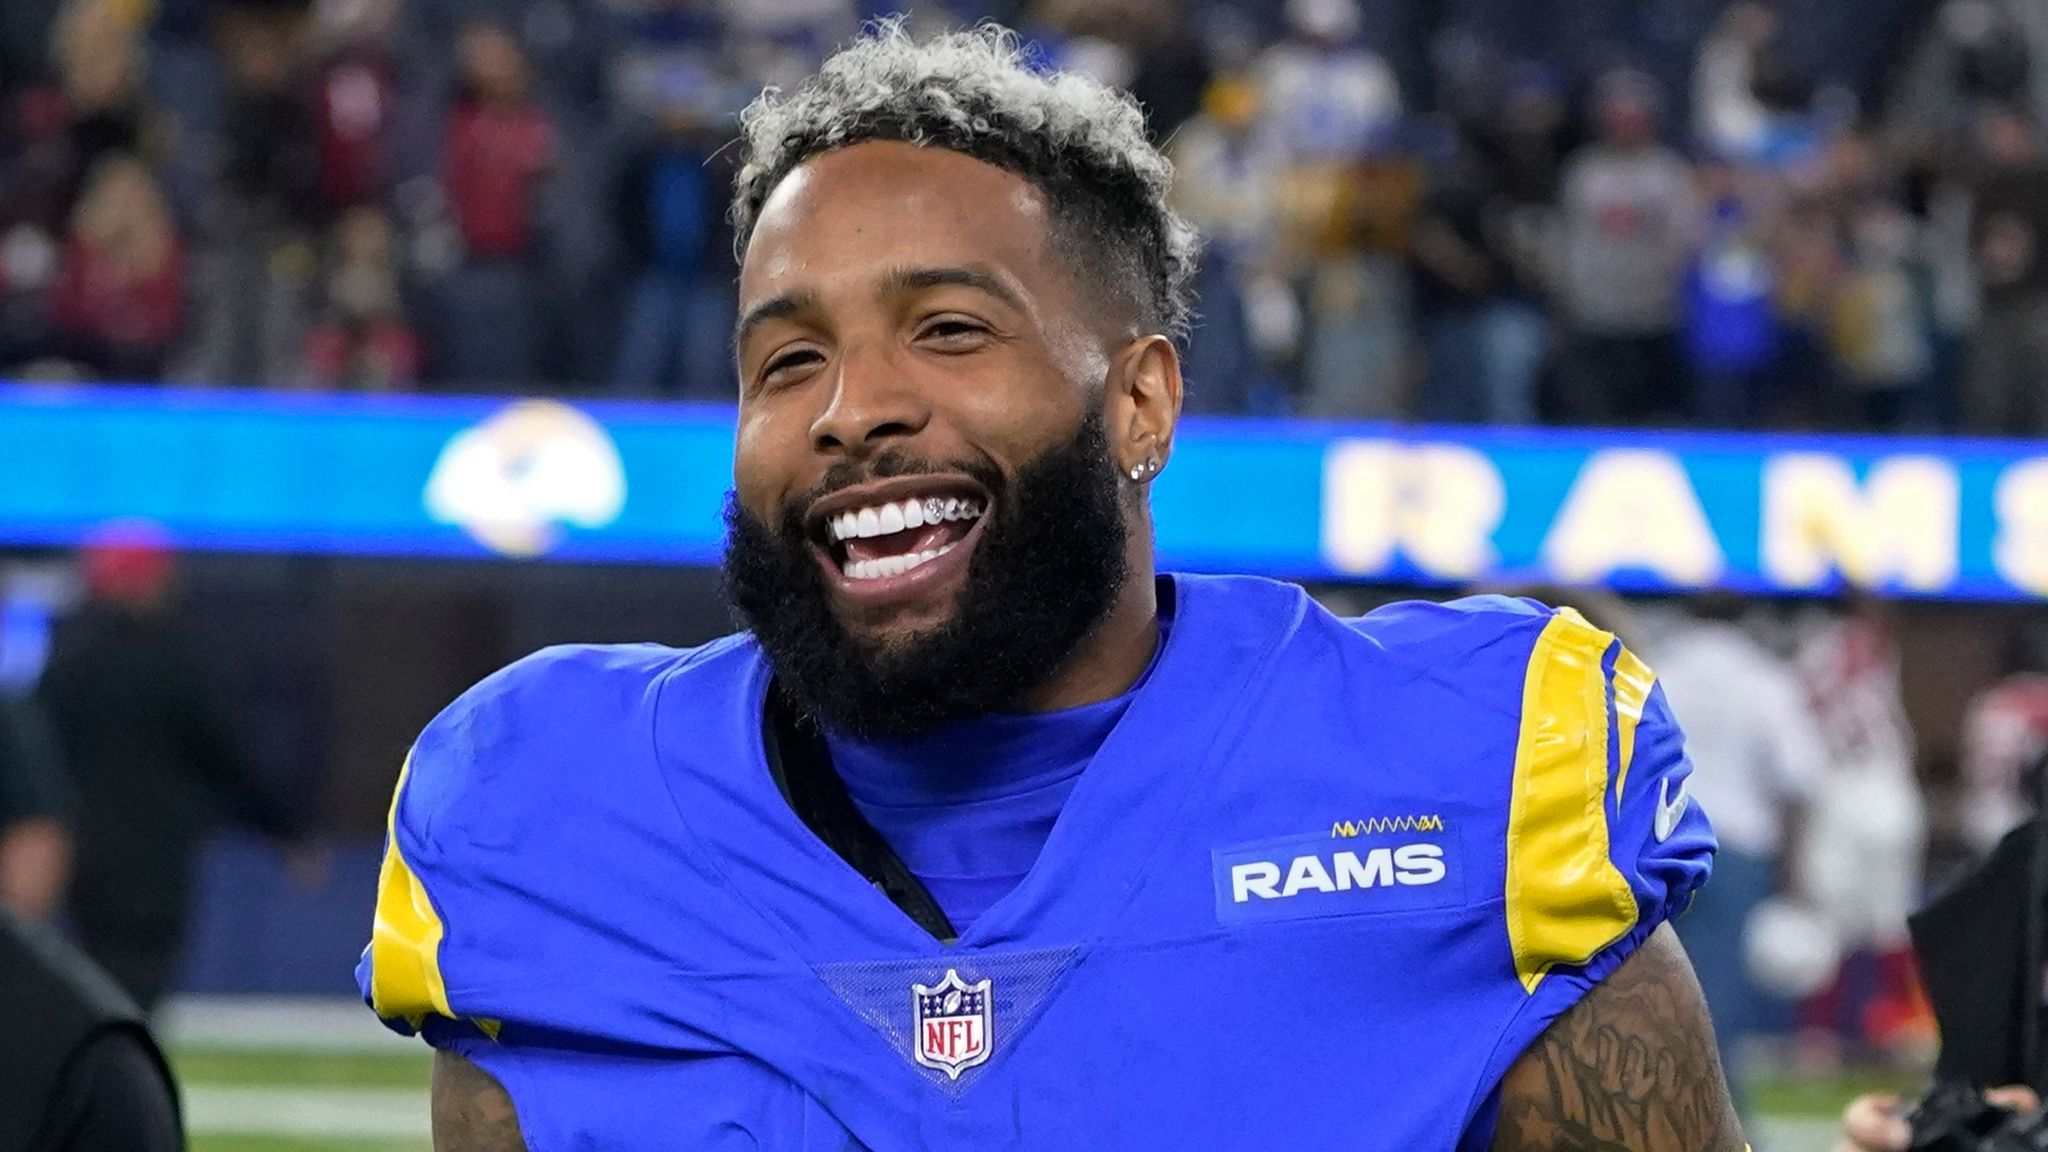 Odell Beckham Jr. Appears To Be Upset With Rams Player